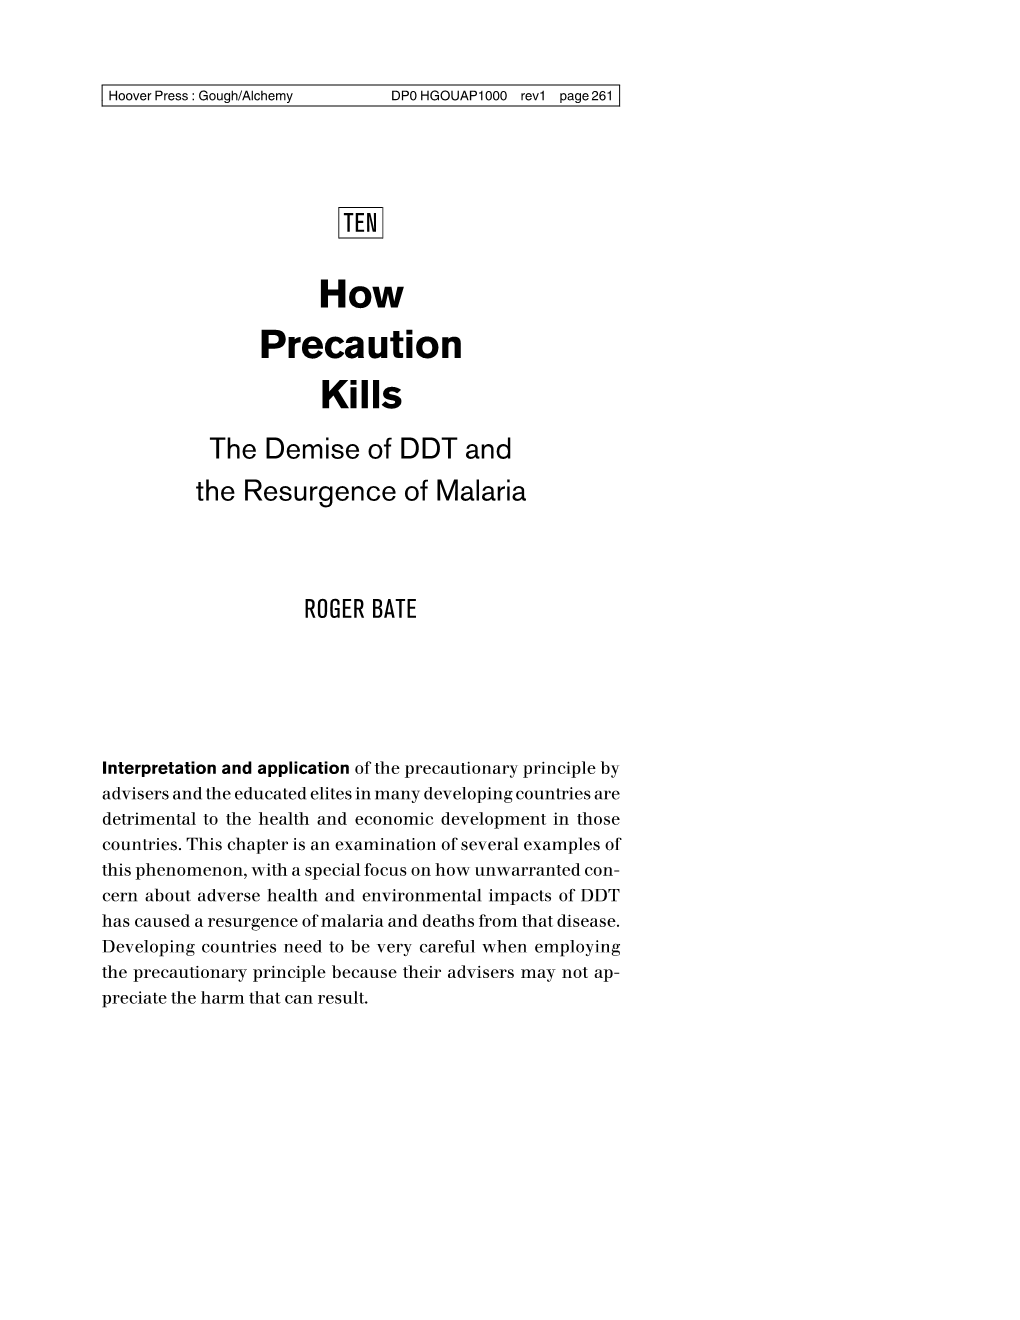 How Precaution Kills: the Demise of DDT and the Resurgence of Malaria